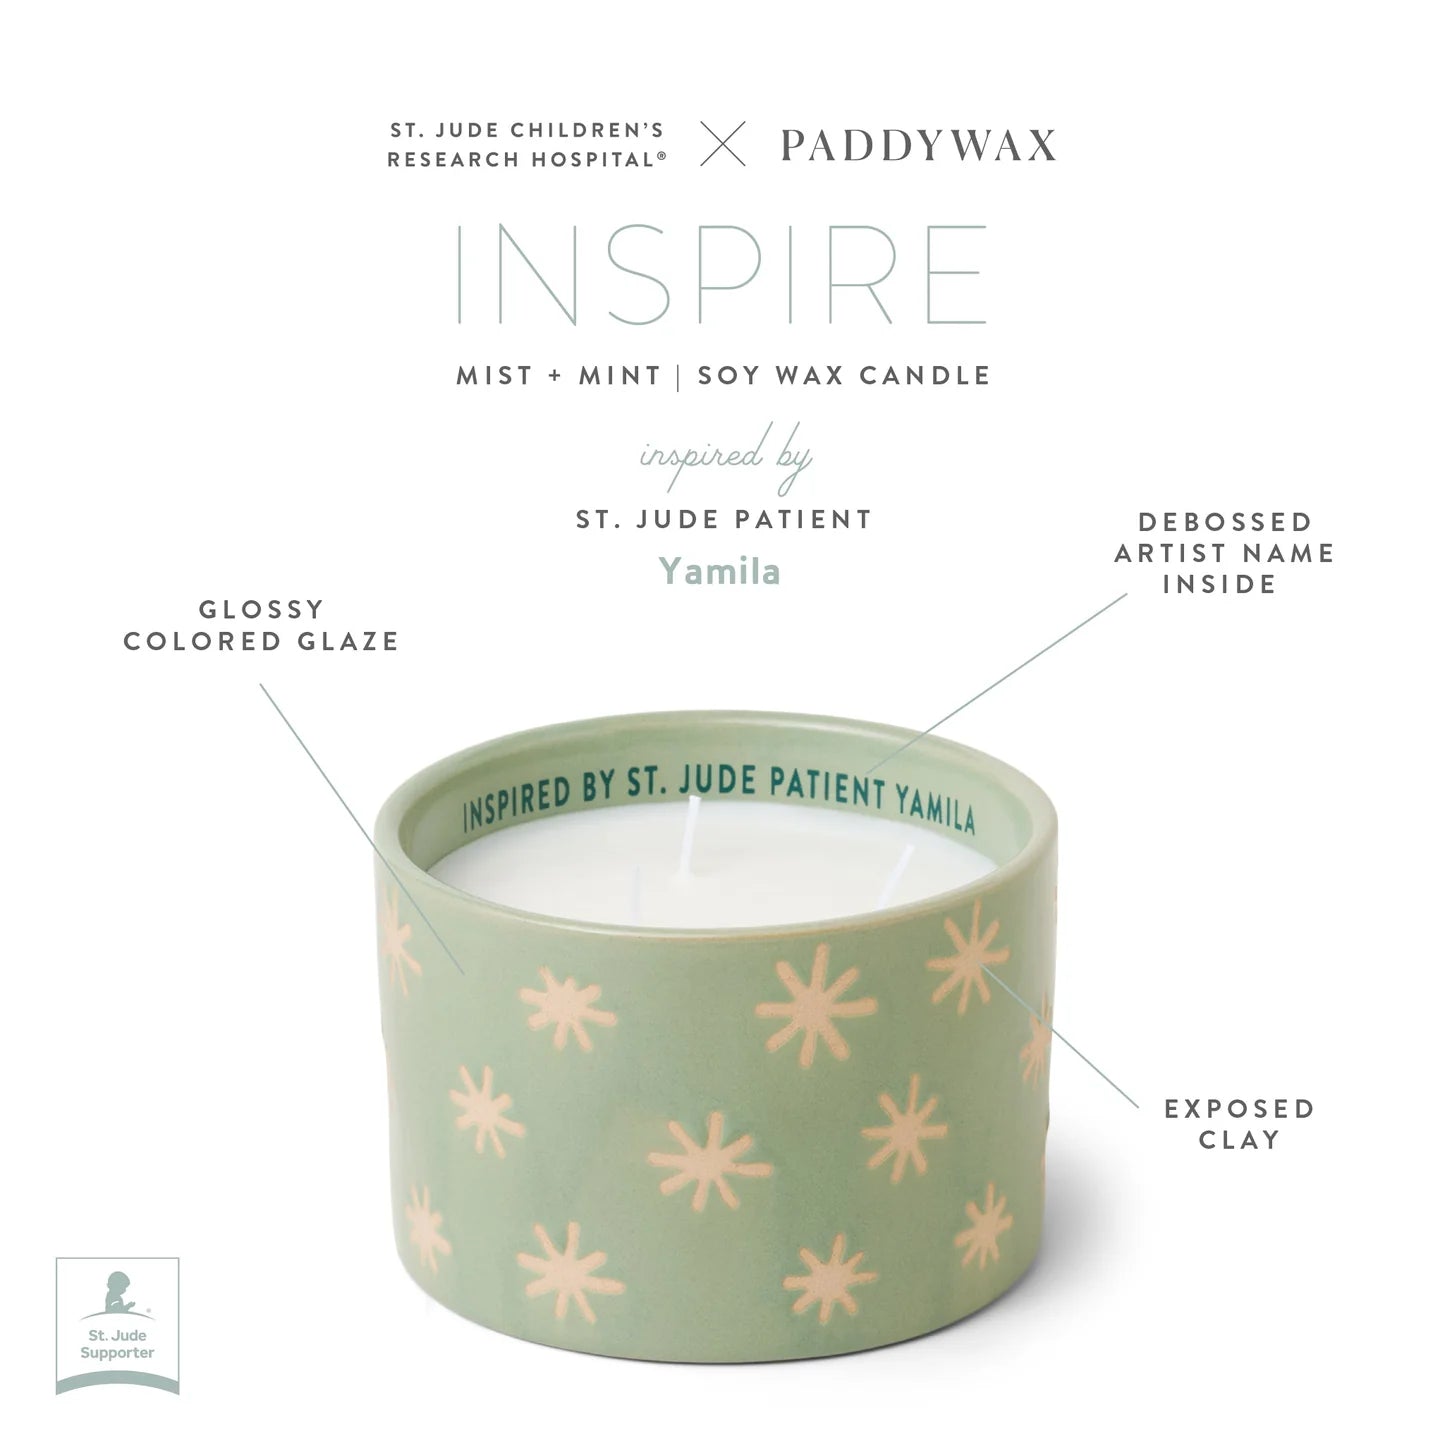 St. Jude Giveback "Inspire" 11 oz. Candle - Mist + Mint